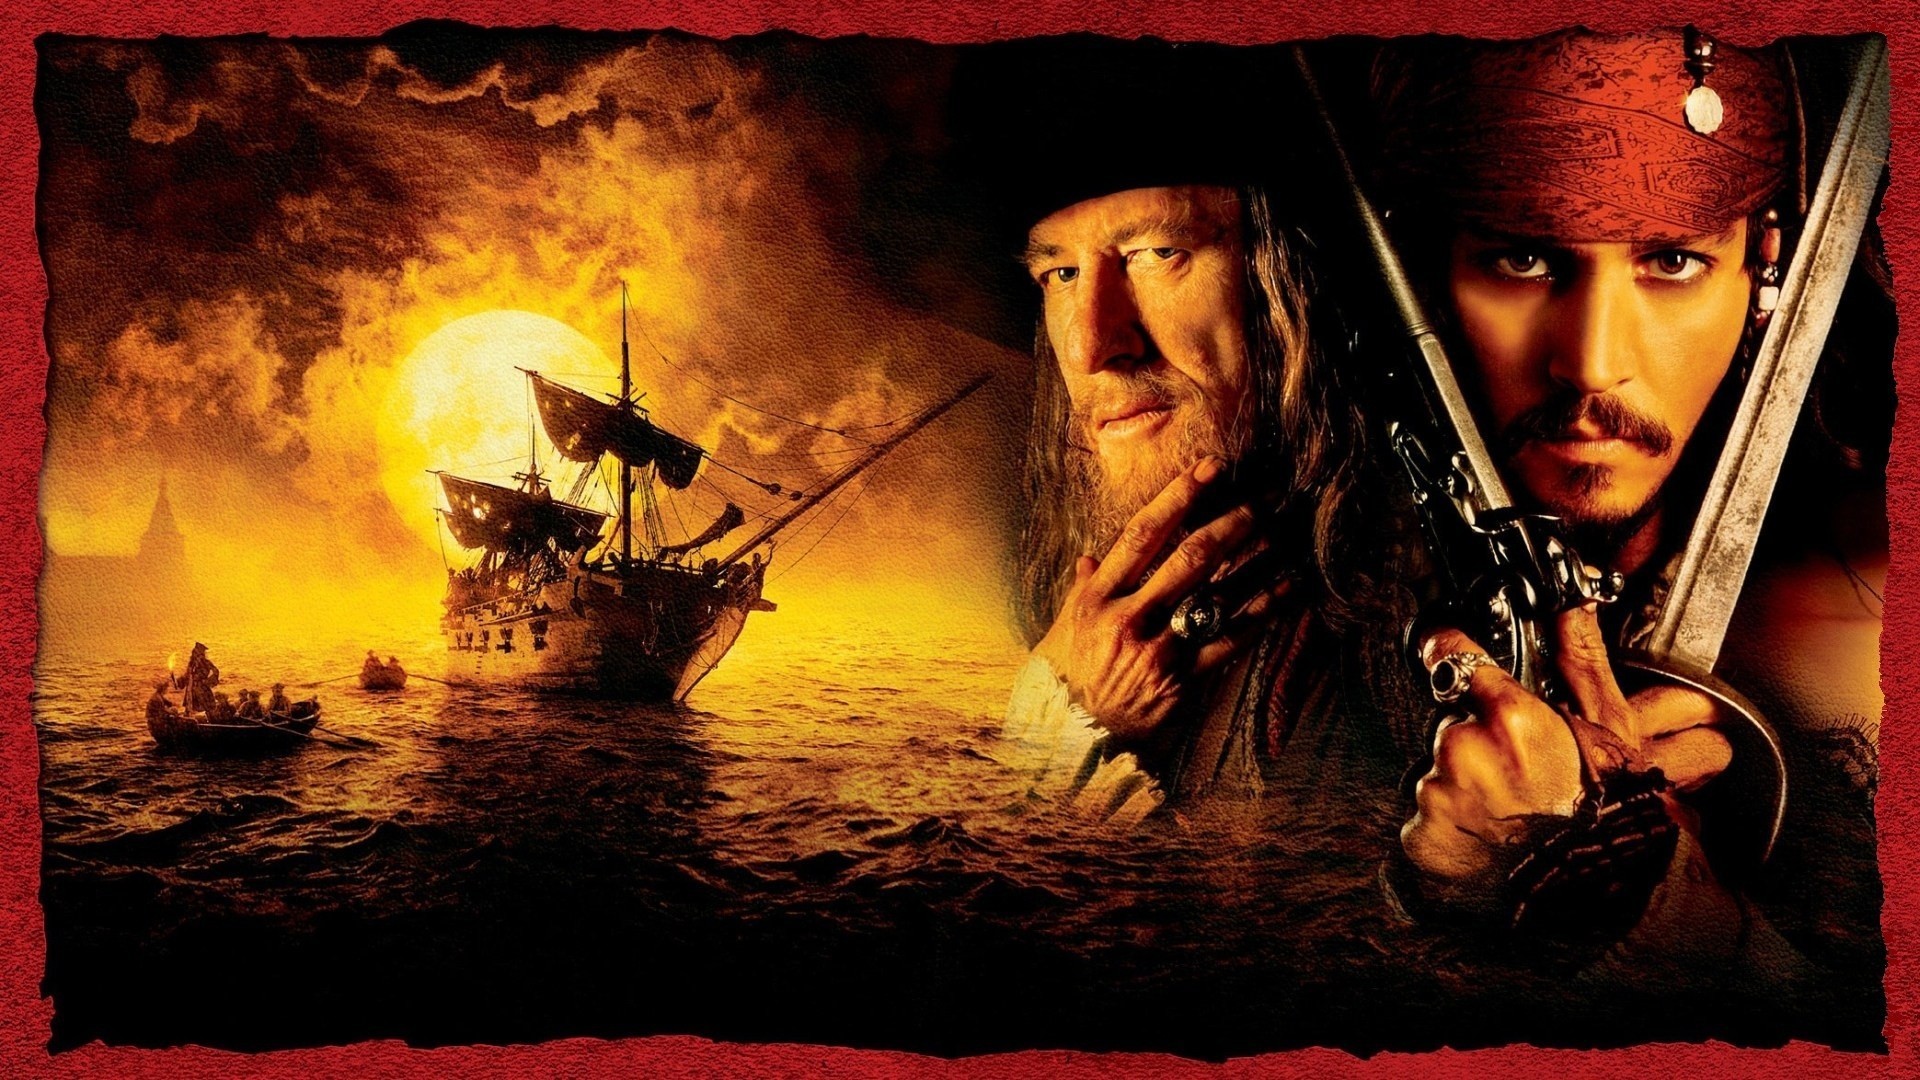 1920x1080 Pirates Of The Caribbean: The Curse Of The Black Pearl Wallpaper 10 - 1920 X